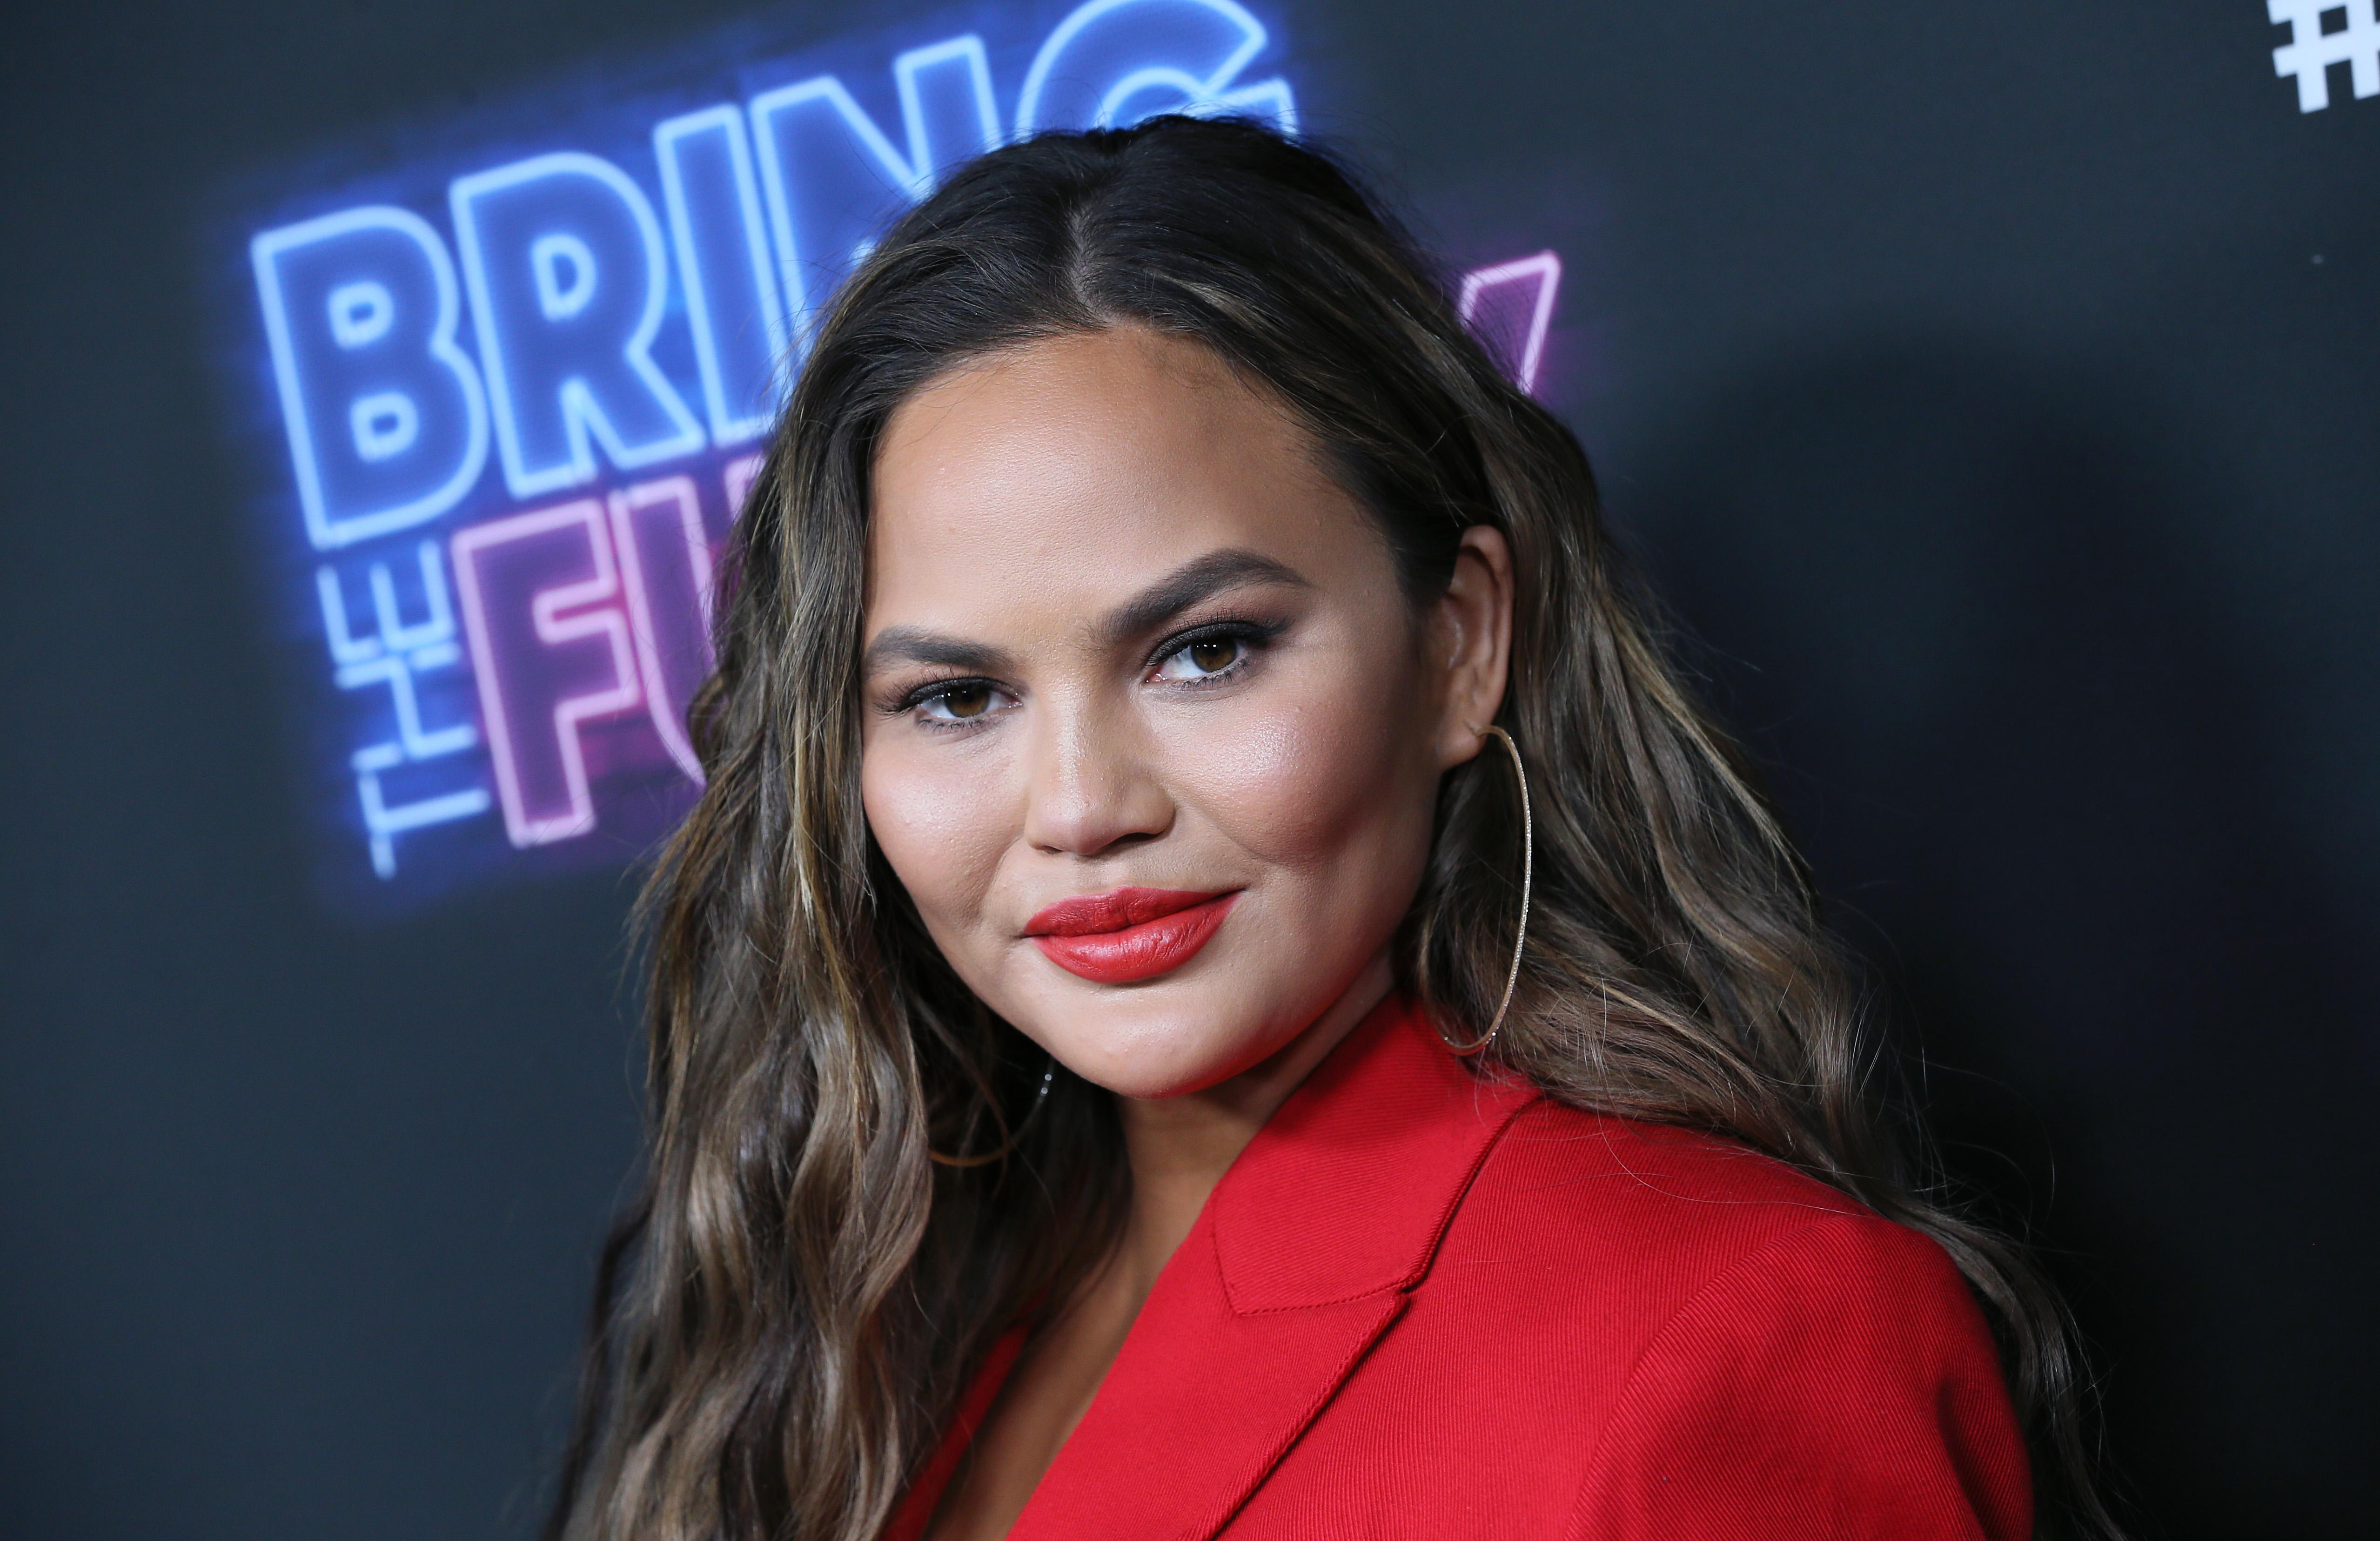 You Don’t Want To Mess Around With this Supermodel: Chrissy Teigen Shuts Down a Hater